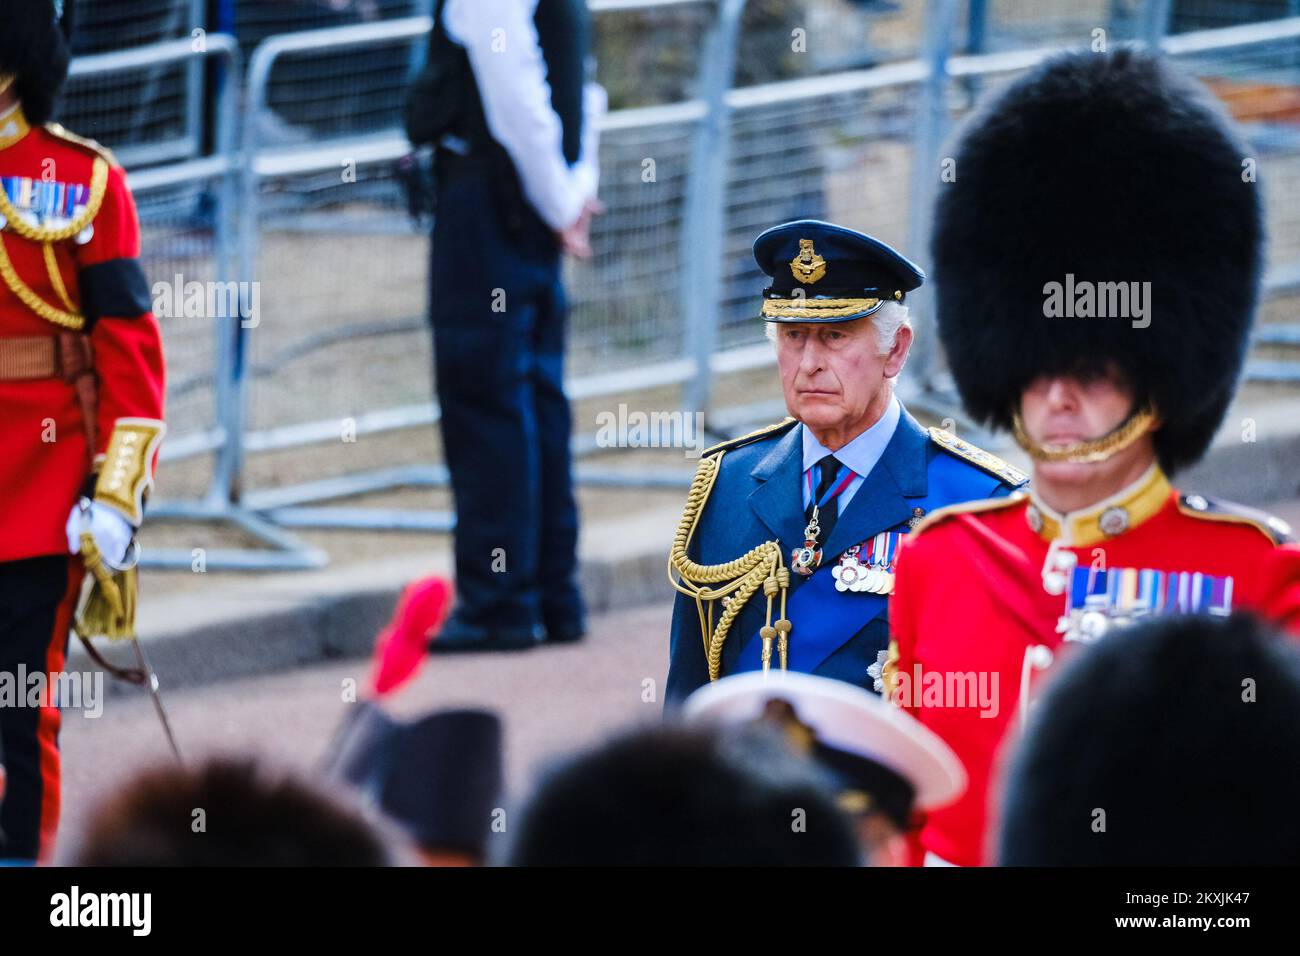 King Charles III walks behind the coffin of his mother, Majesty Queen Elizabeth II photographed during The ceremonial procession to transport her late Majesty Queen Elizabeth II’s coffin from Buckingham Palace to the Palace of Westminster at The Mall , London on Wednesday 14 September 2022 . Picture by Julie Edwards. Stock Photo